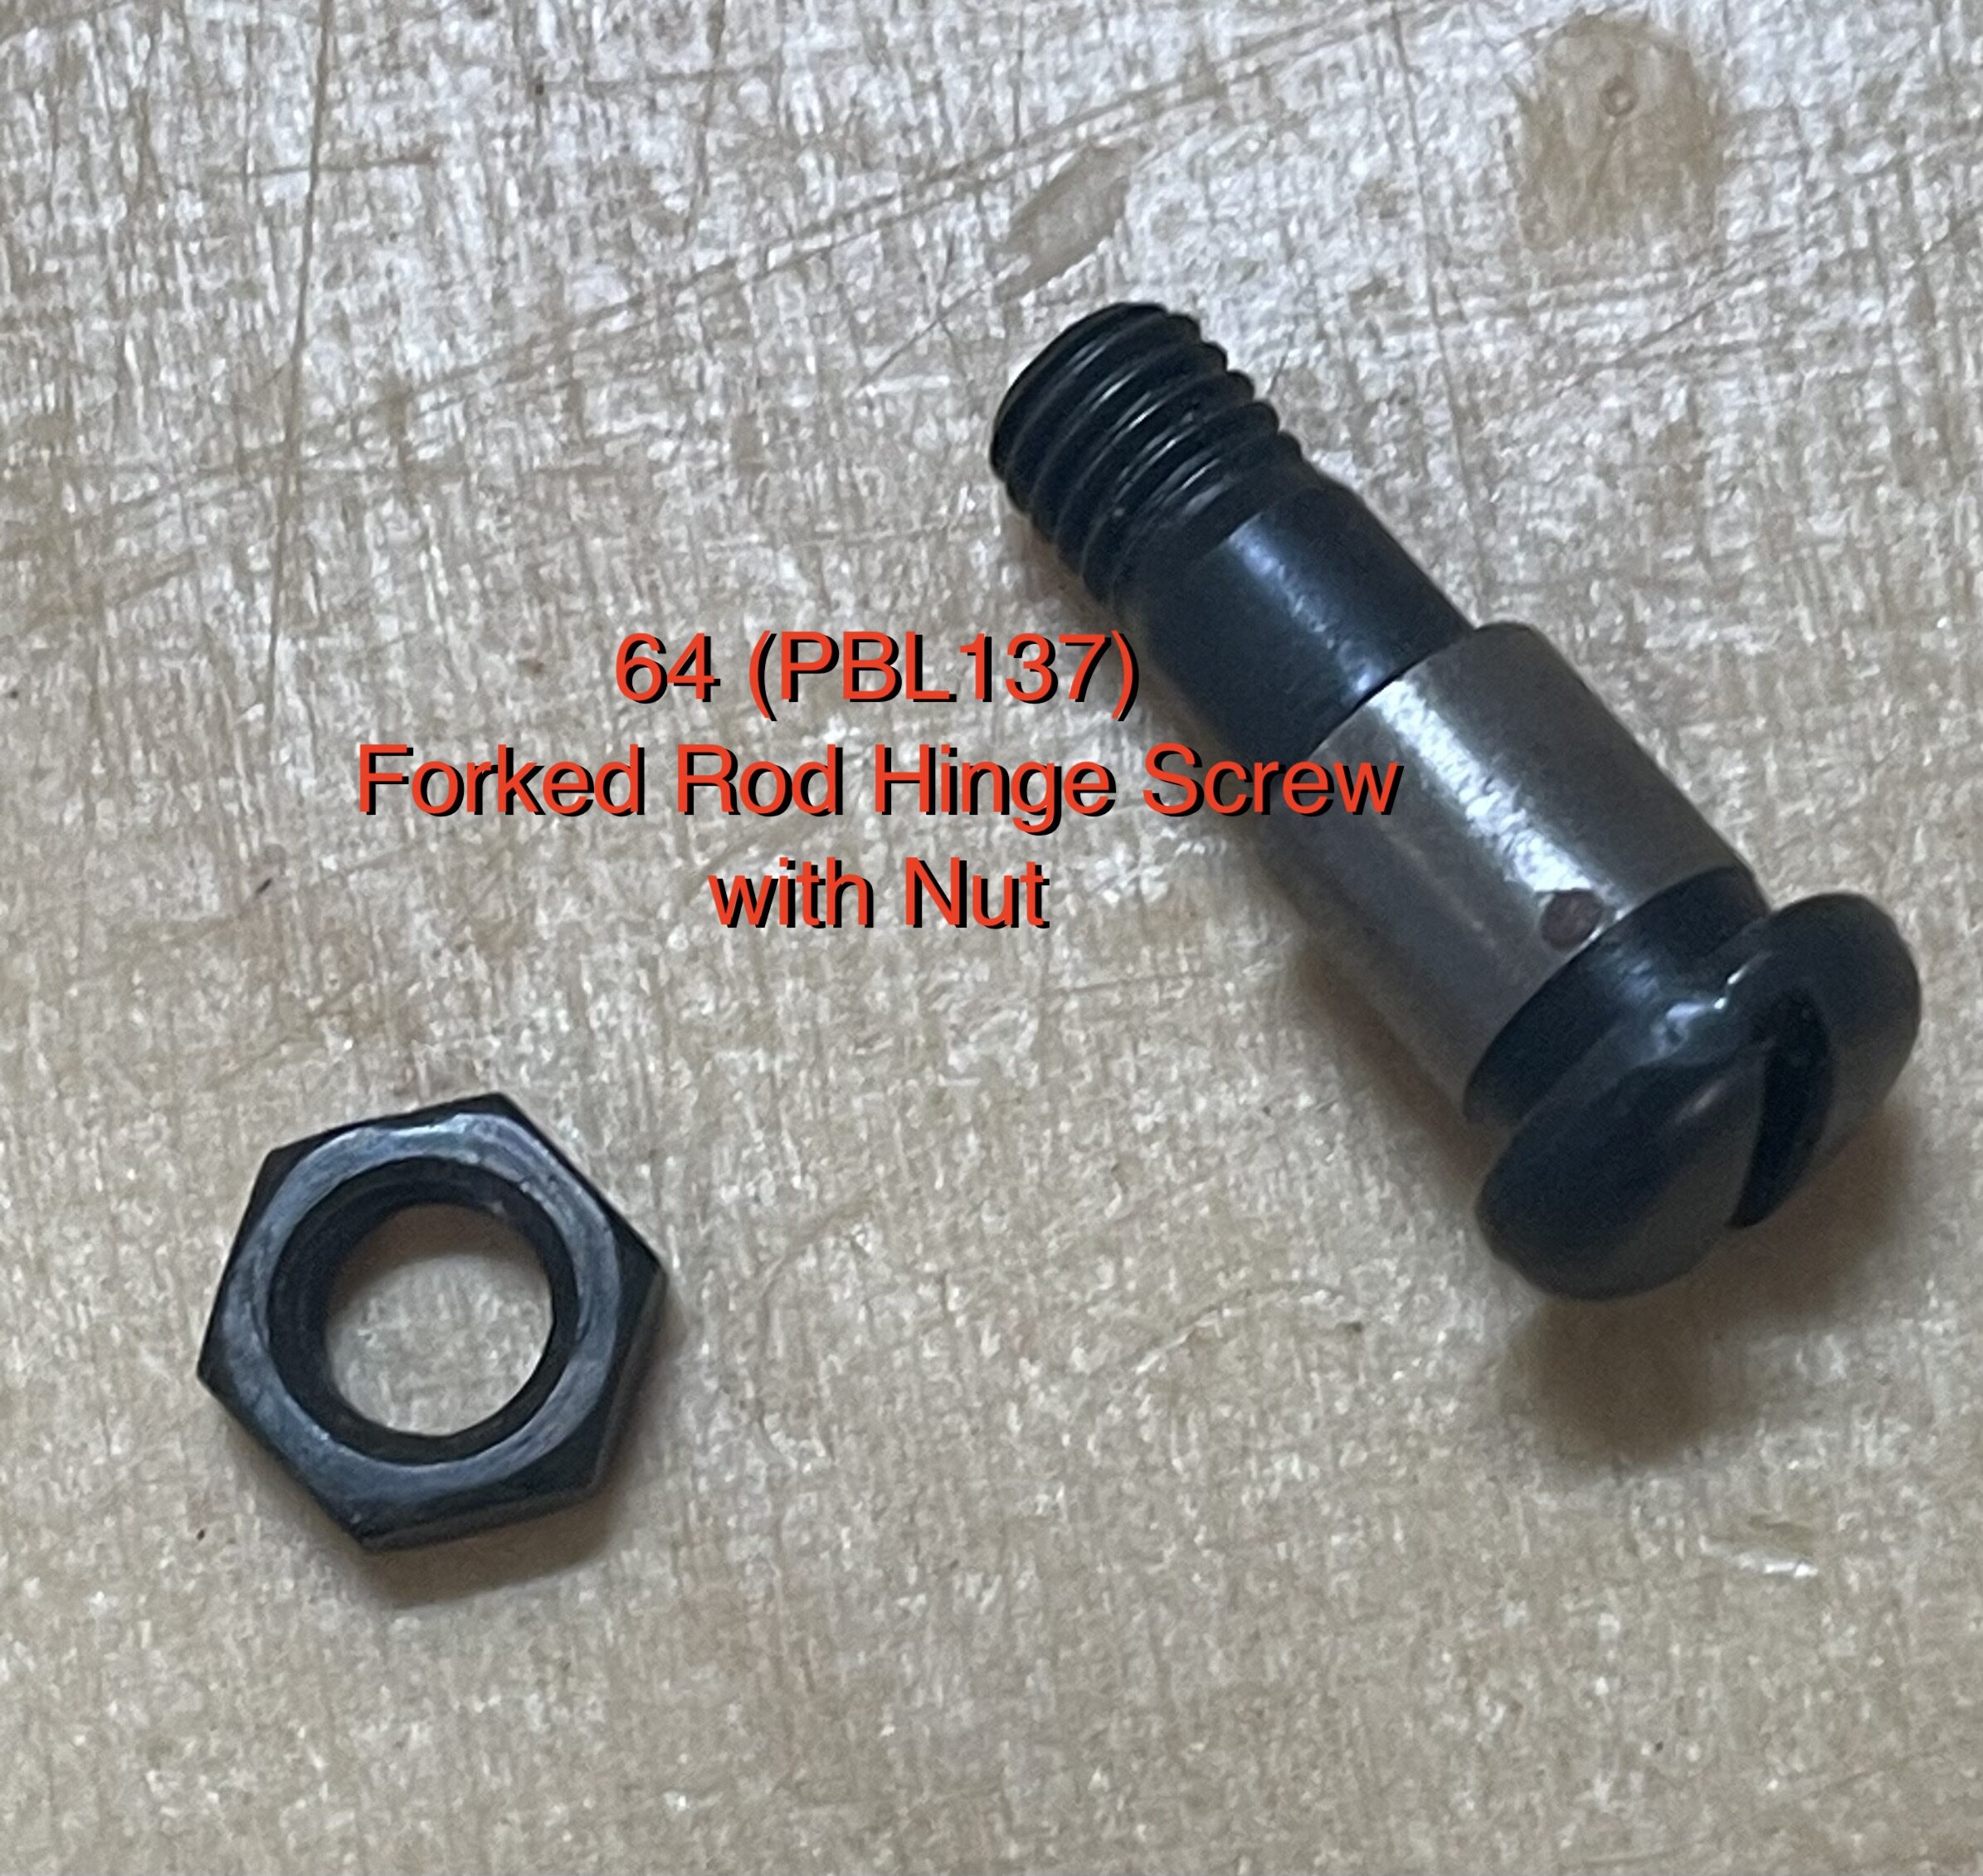 64 (PBL137) Forked Rod Hinge Screw with Nut (2 parts)